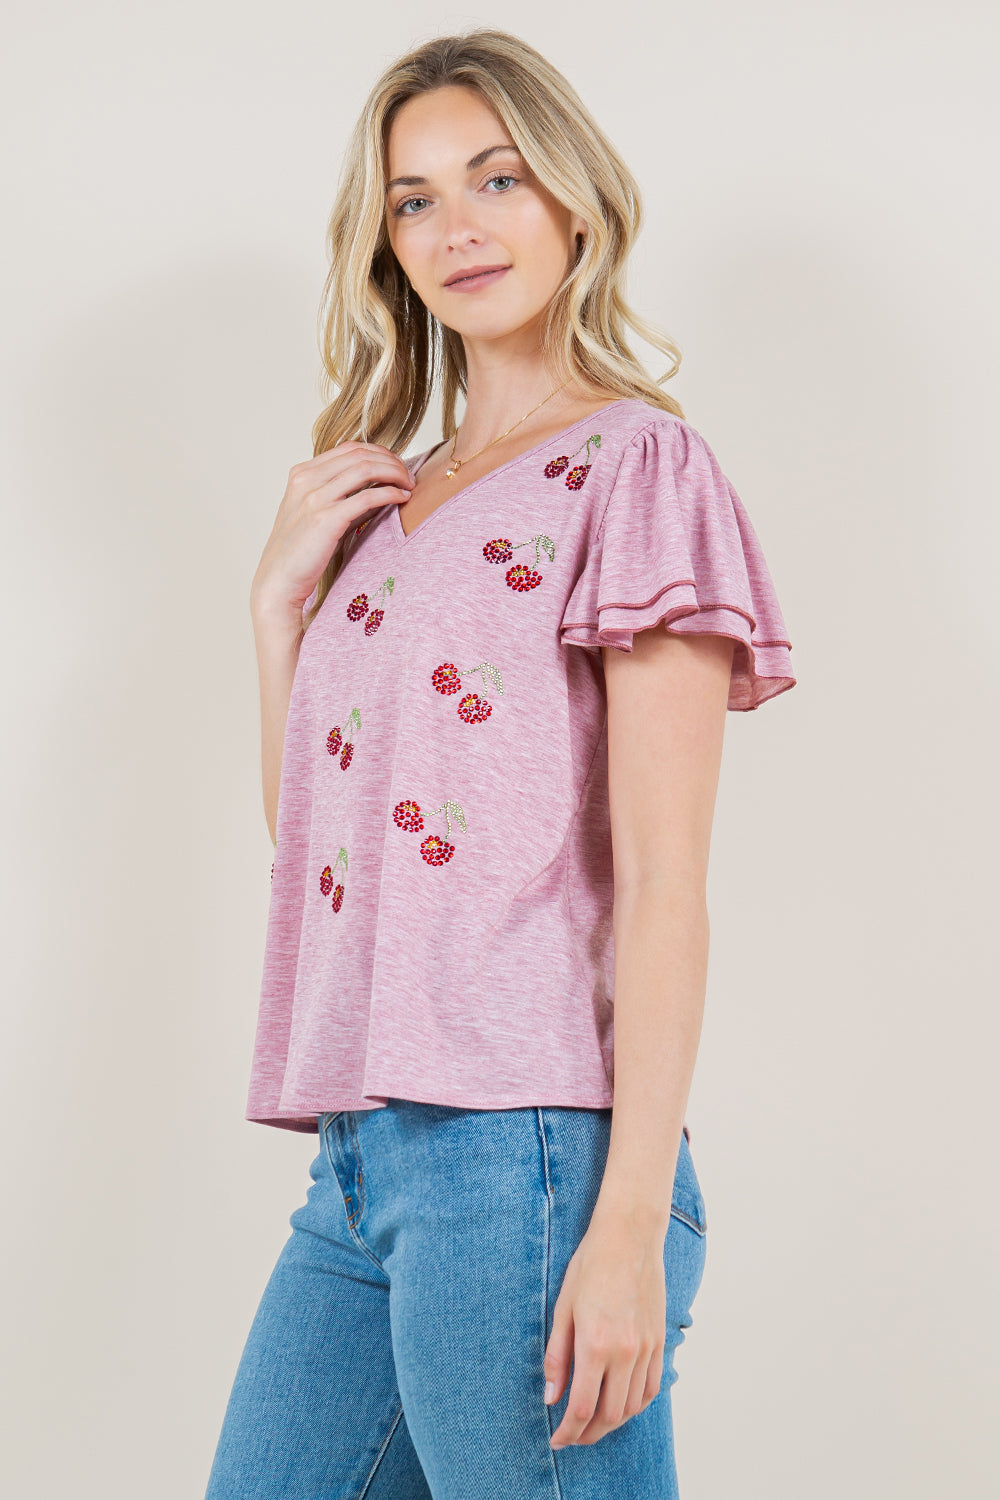 DOUBLE RUFFLE WITH CONTRAST MARROW EDGE V NECK SWING TOP - T11290-J23007